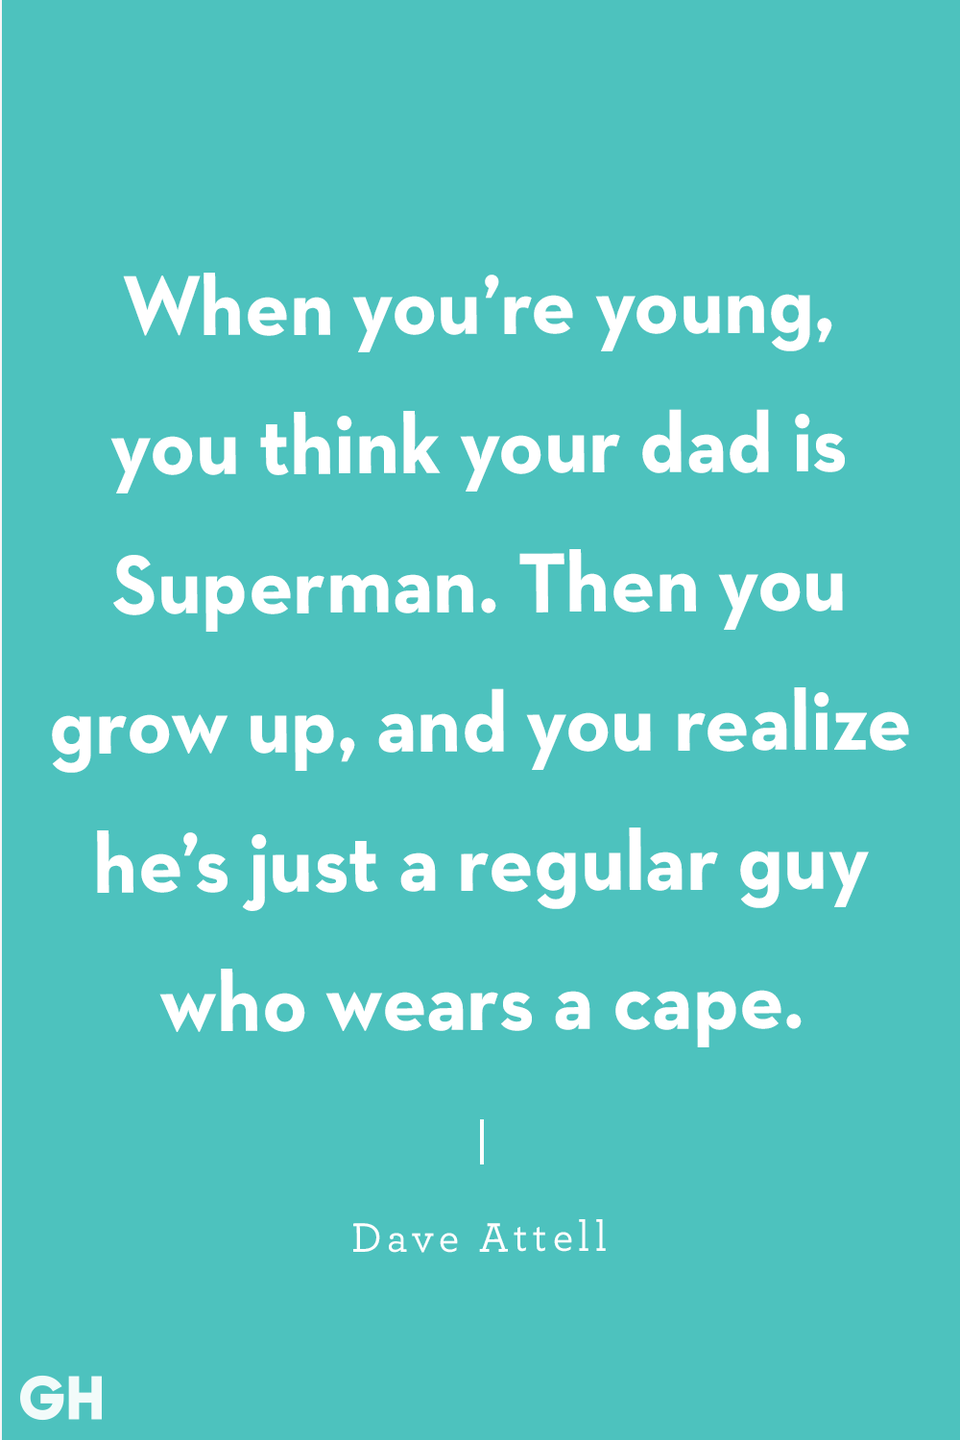 <p>When you’re young, you think your dad is Superman. Then you grow up, and you realize he’s just a regular guy who wears a cape.</p>